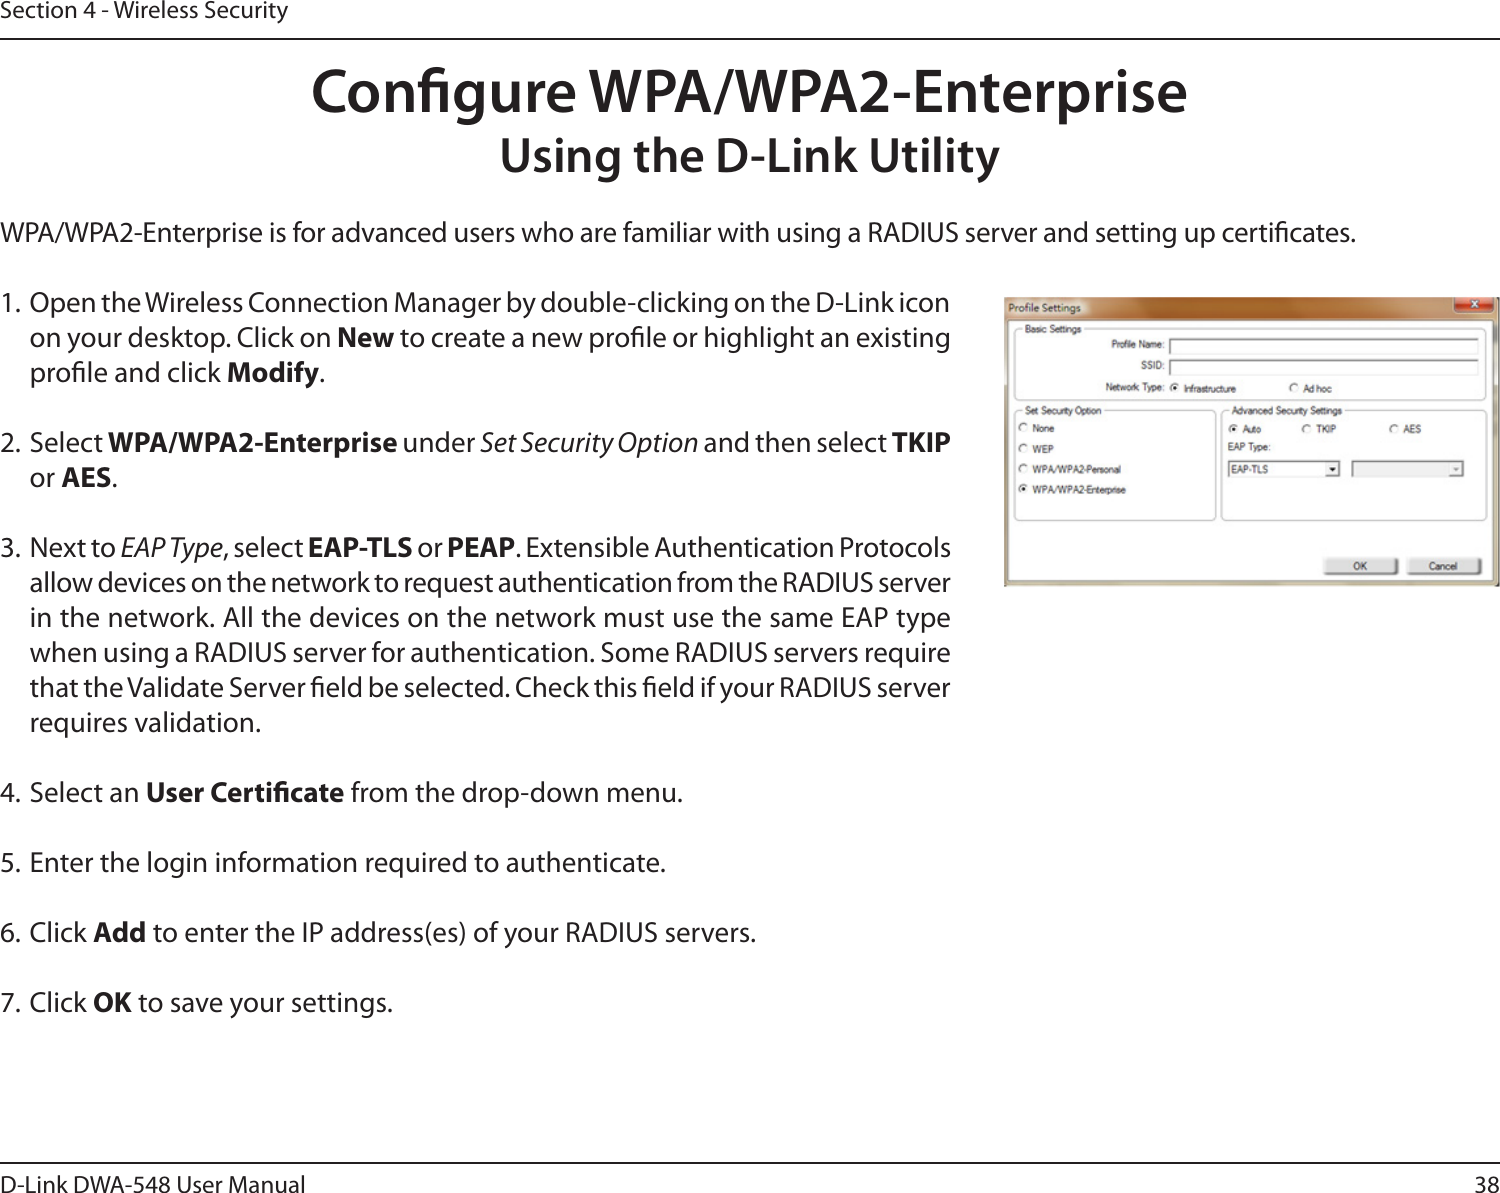 38D-Link DWA-548 User ManualSection 4 - Wireless SecurityCongure WPA/WPA2-EnterpriseUsing the D-Link UtilityWPA/WPA2-Enterprise is for advanced users who are familiar with using a RADIUS server and setting up certicates.1. Open the Wireless Connection Manager by double-clicking on the D-Link icon on your desktop. Click on New to create a new prole or highlight an existing prole and click Modify. 2. Select WPA/WPA2-Enterprise under Set Security Option and then select TKIP or AES.3. Next to EAP Type, select EAP-TLS or PEAP. Extensible Authentication Protocols allow devices on the network to request authentication from the RADIUS server in the network. All the devices on the network must use the same EAP type when using a RADIUS server for authentication. Some RADIUS servers require that the Validate Server eld be selected. Check this eld if your RADIUS server requires validation.4. Select an User Certicate from the drop-down menu.5. Enter the login information required to authenticate.6. Click Add to enter the IP address(es) of your RADIUS servers.7. Click OK to save your settings.